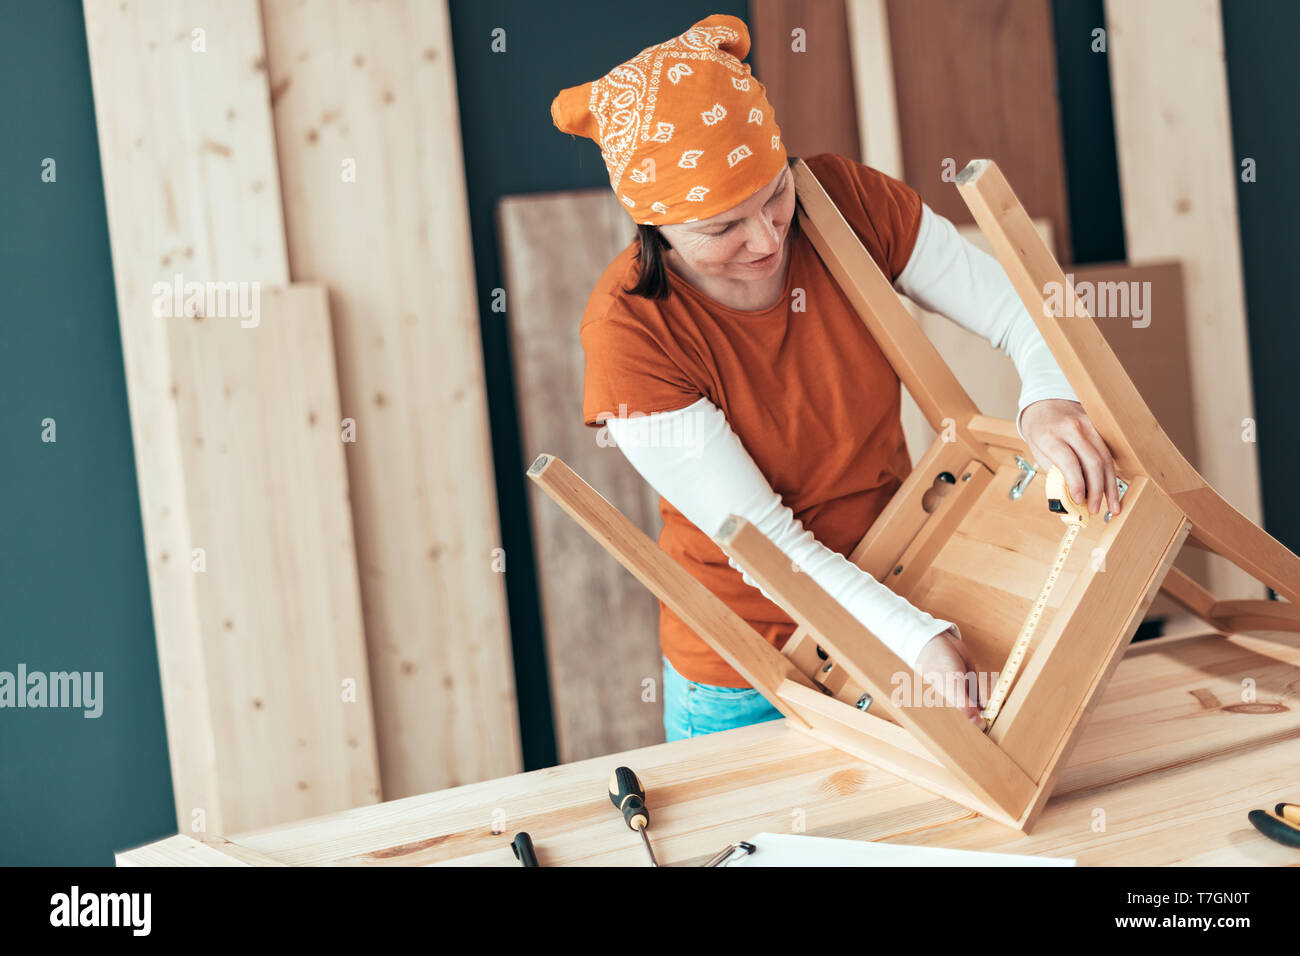 Female carpenter repairing wooden chair seat in small business woodwork workshop Stock Photo